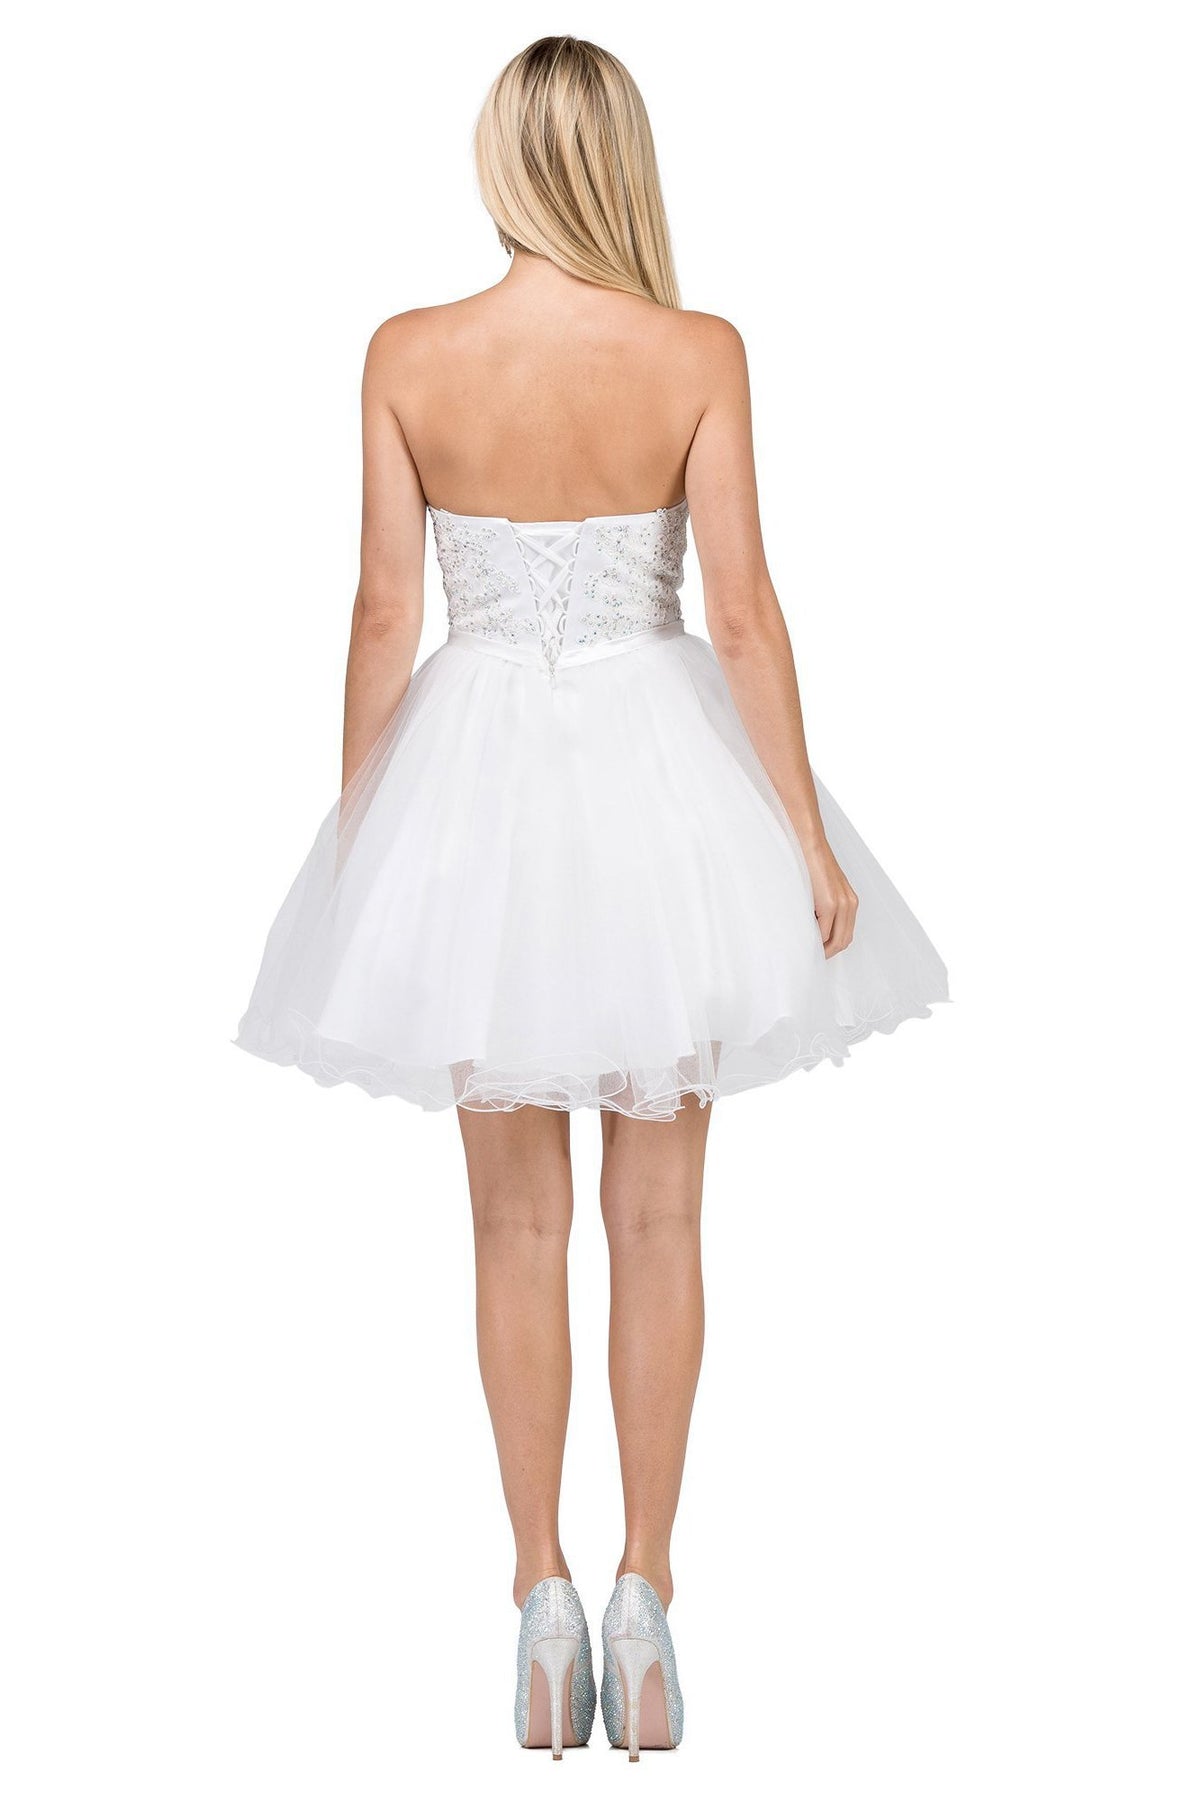 Dancing Queen - 3014 Strapless Embellished Sweetheart Homecoming Dress In White